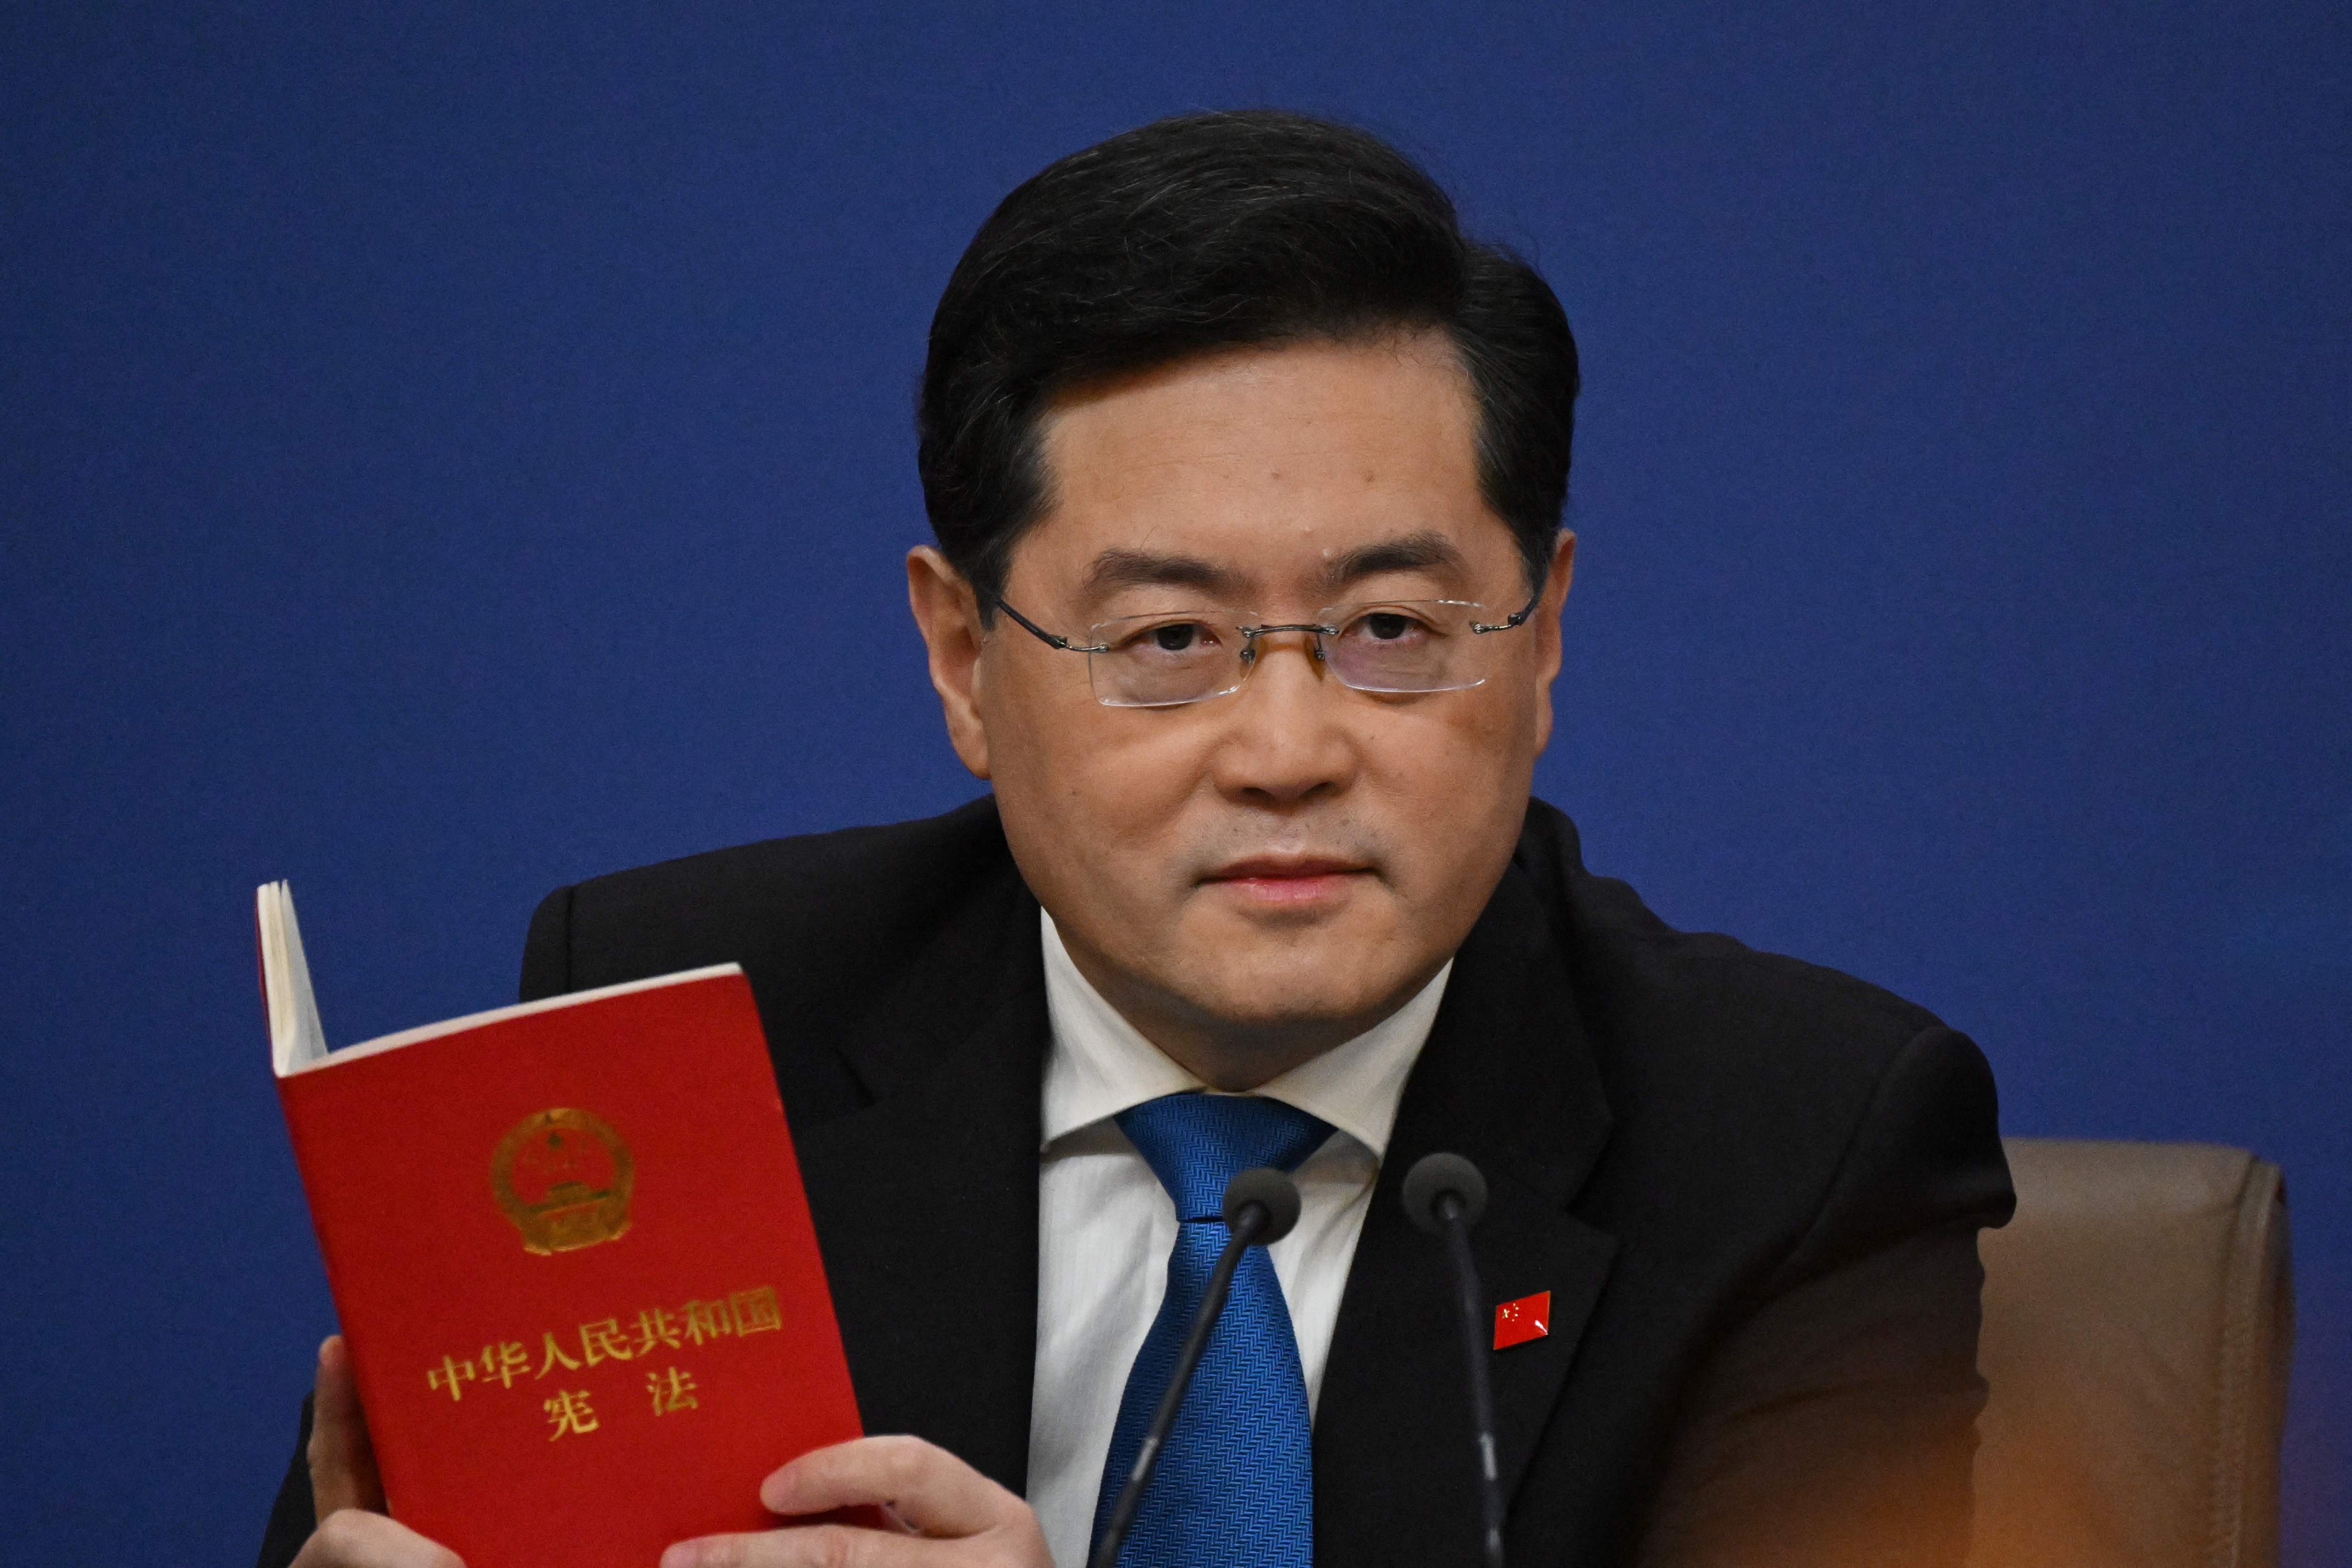 Chinese foreign minister Qin Gang holds a copy of China’s constitution during a press conferencein March 2023